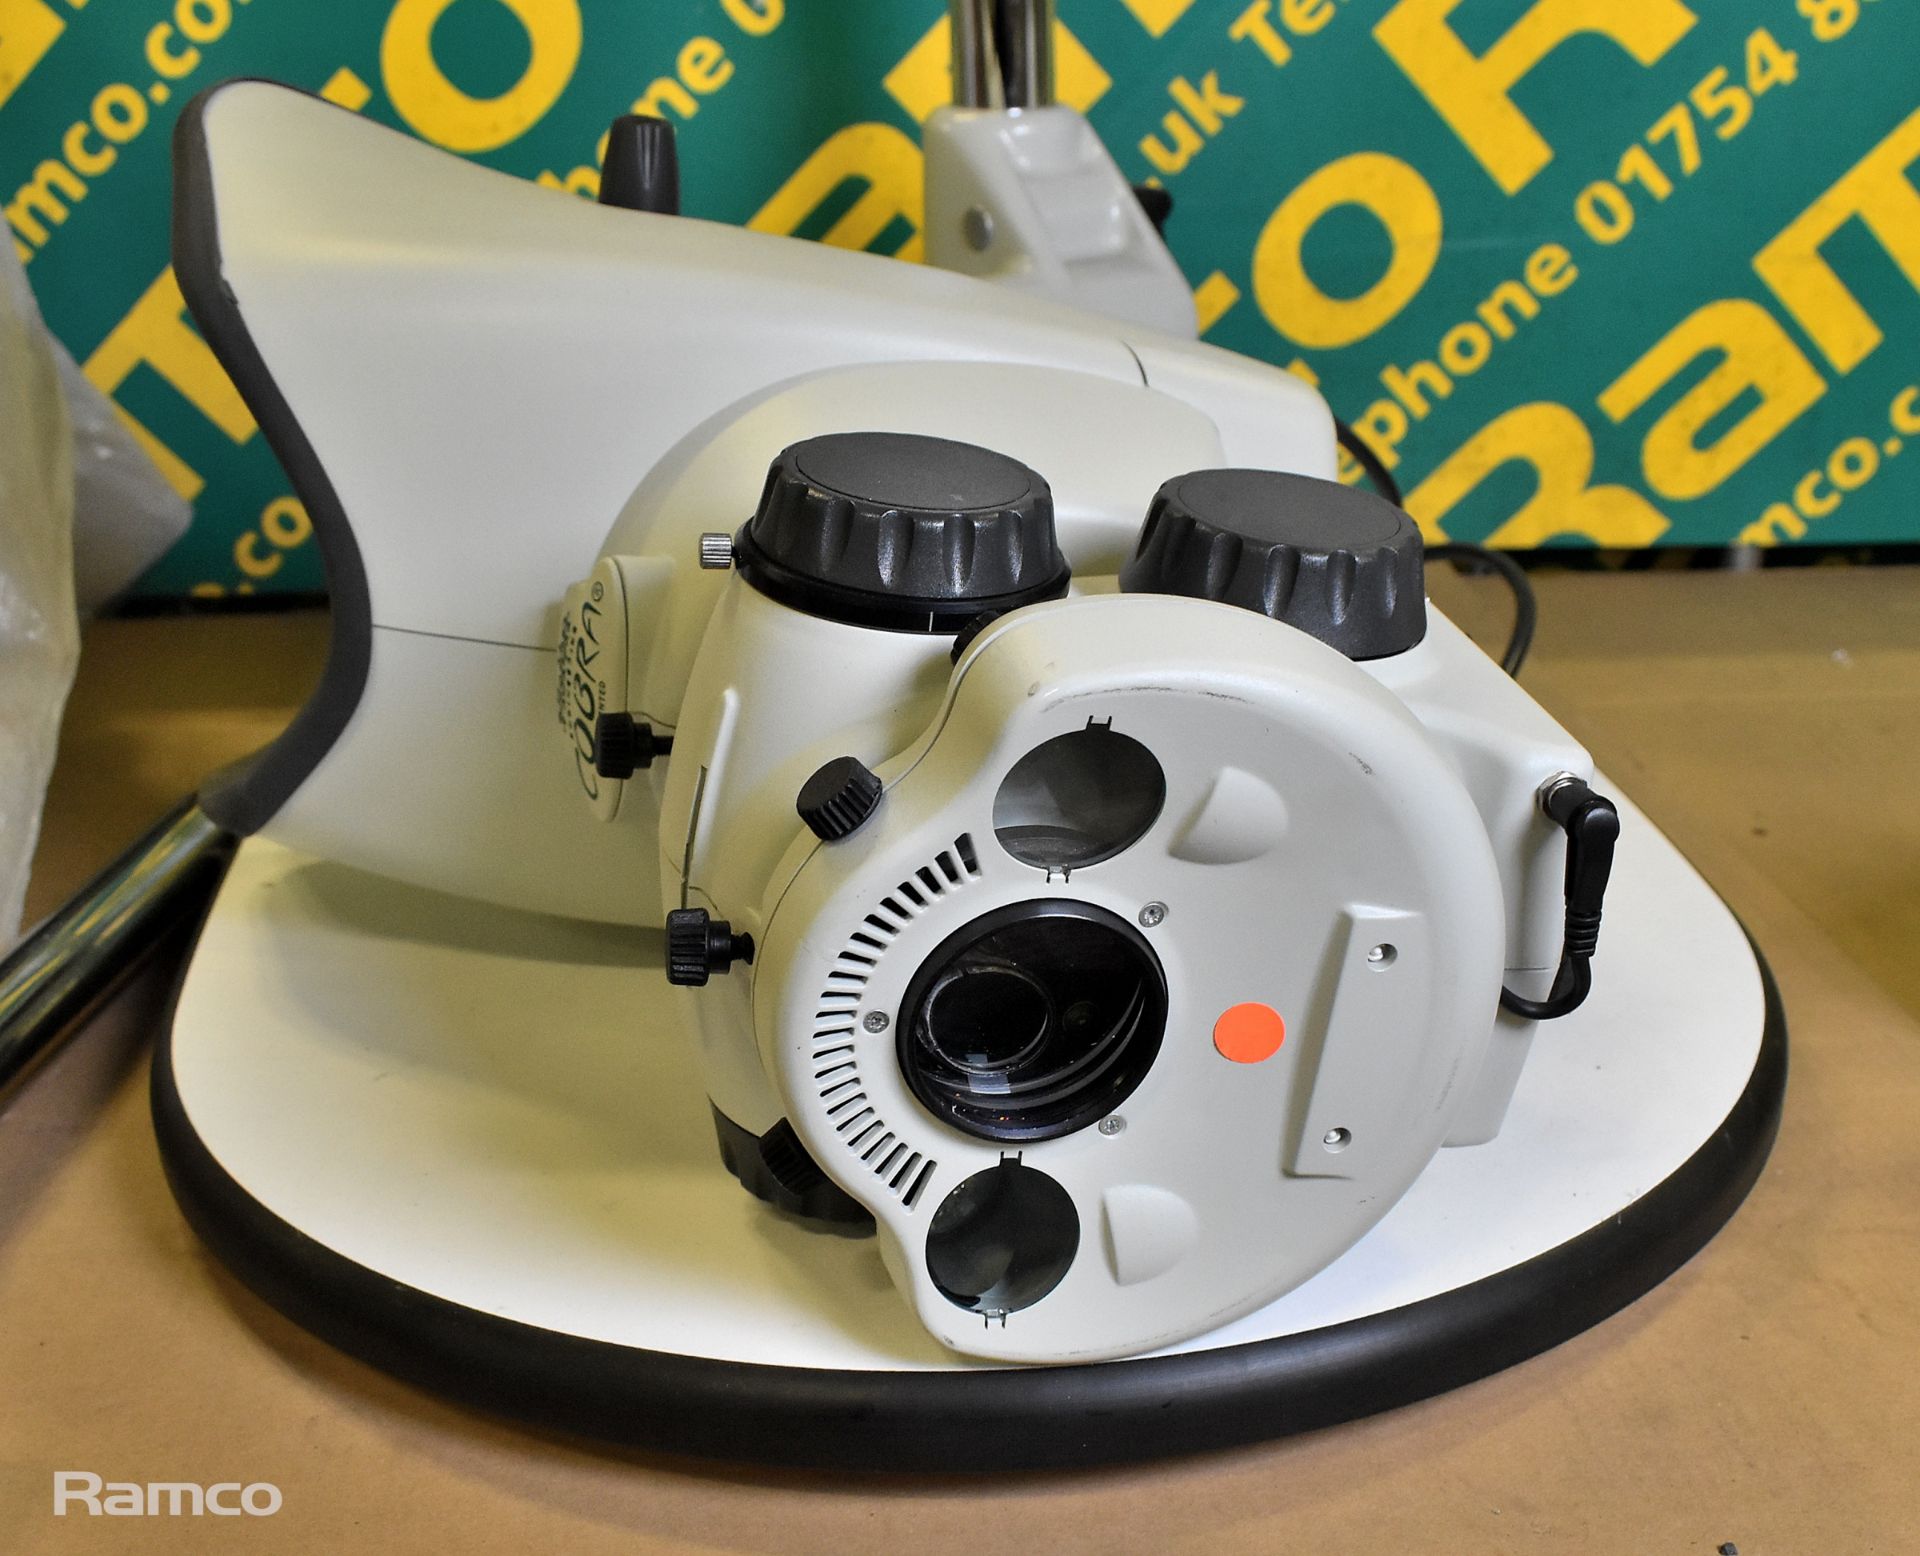 Vision engineering Cobra stereo zoom microscope - Image 3 of 10